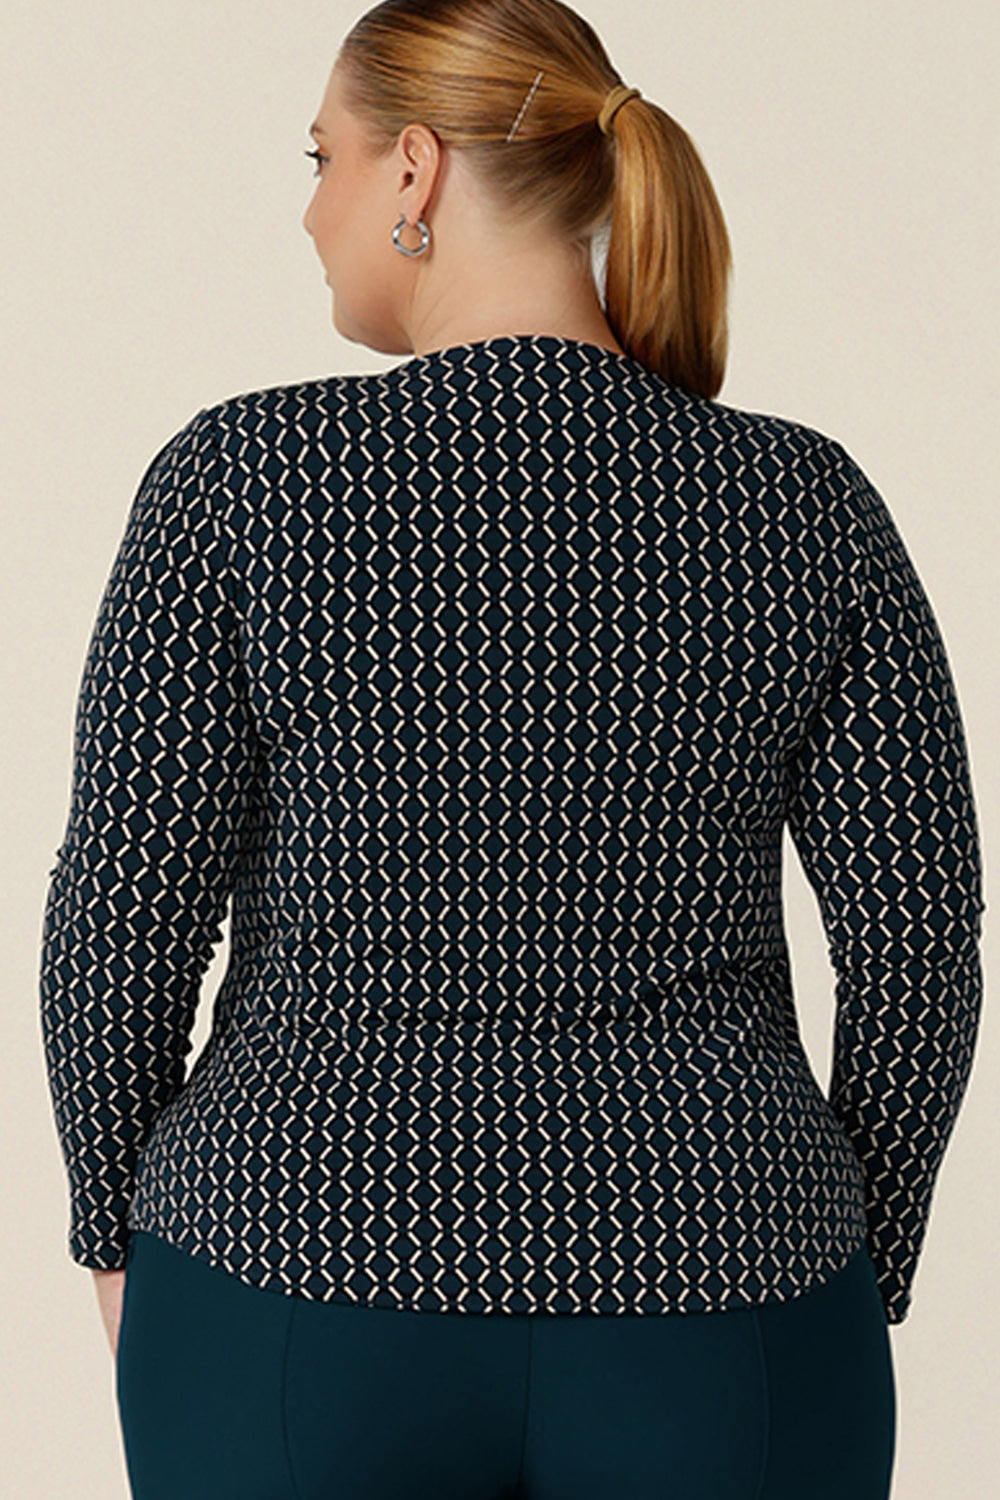 Back view of a plus size, size 18 woman wearing a long sleeve tops with squared scoop neckline. In geometric print jersey, this comfortable top is good for work wear capsule wardrobes. Made in Australia, shop tops in sizes 8 to 24.